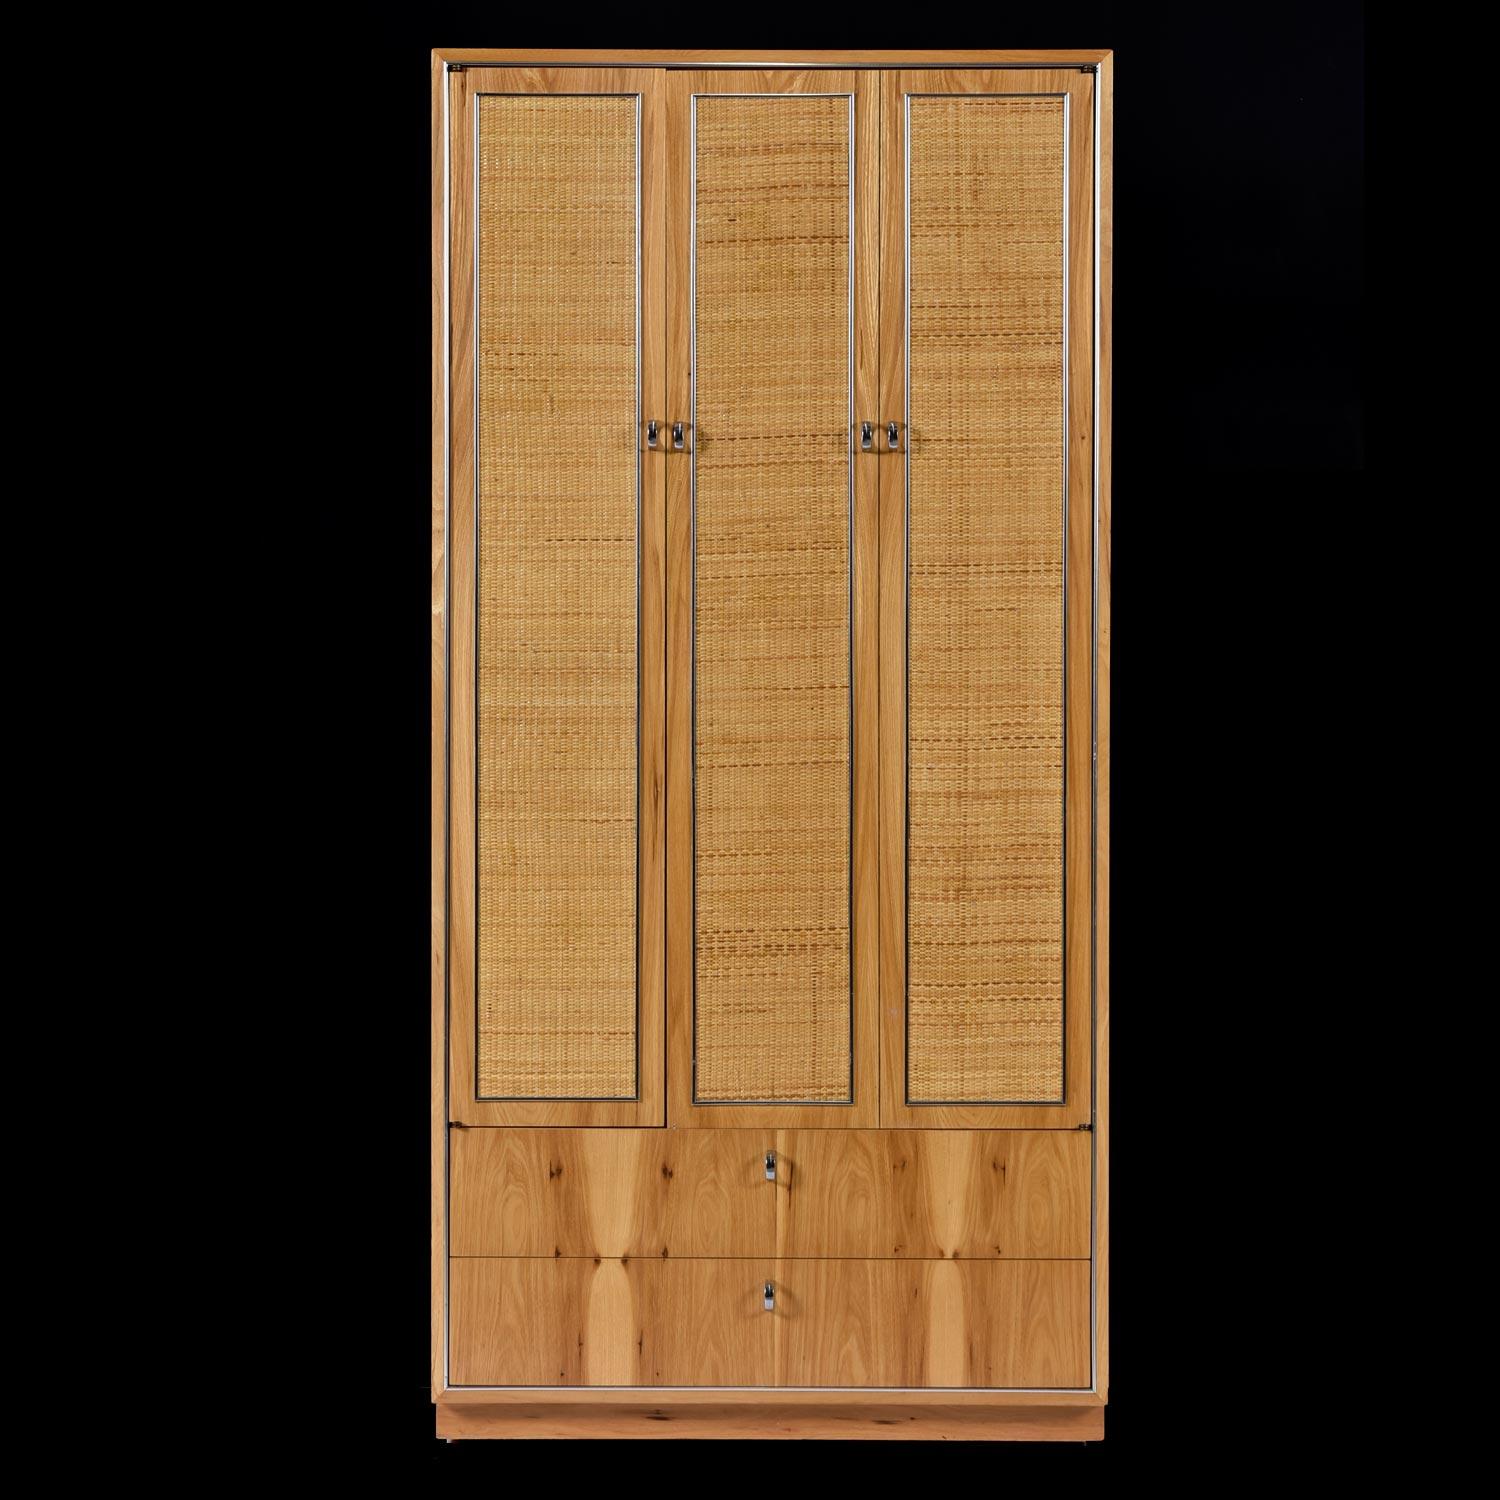 Masterfully crafted and preserved vintage 1970s armoire by John Stuart. We were lucky enough to purchase this piece from a time capsule estate outfitted with premium furnishings. This hickory wood armoire is in outstanding original condition. It